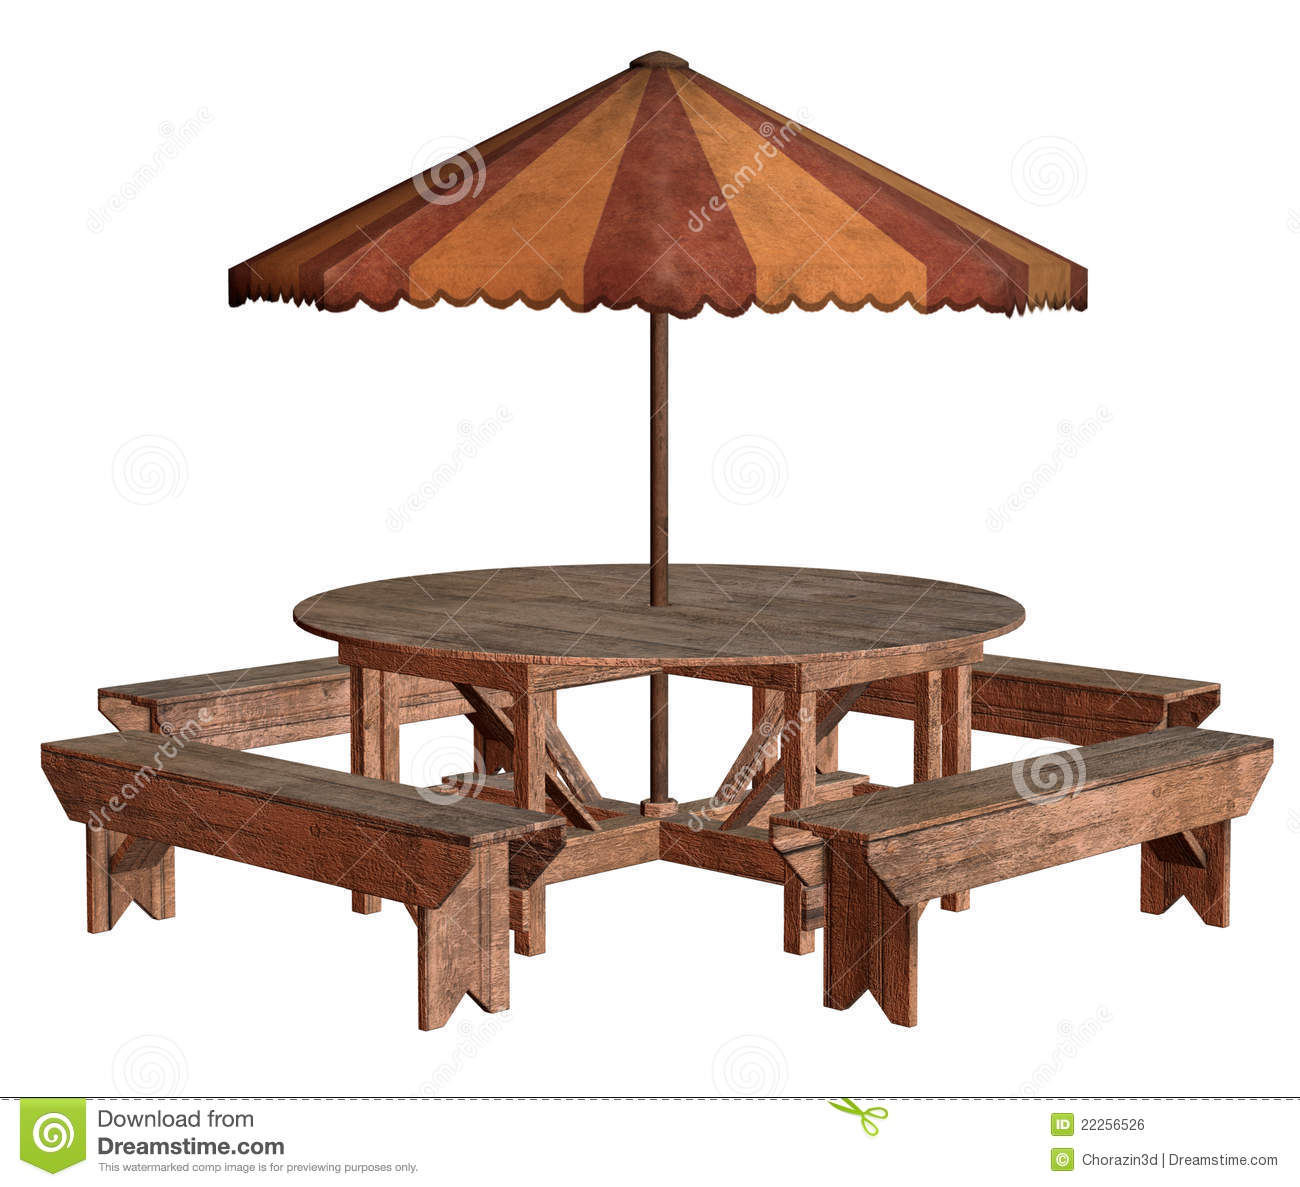 Picnic Table Royalty Free Stock Image   Image  22256526